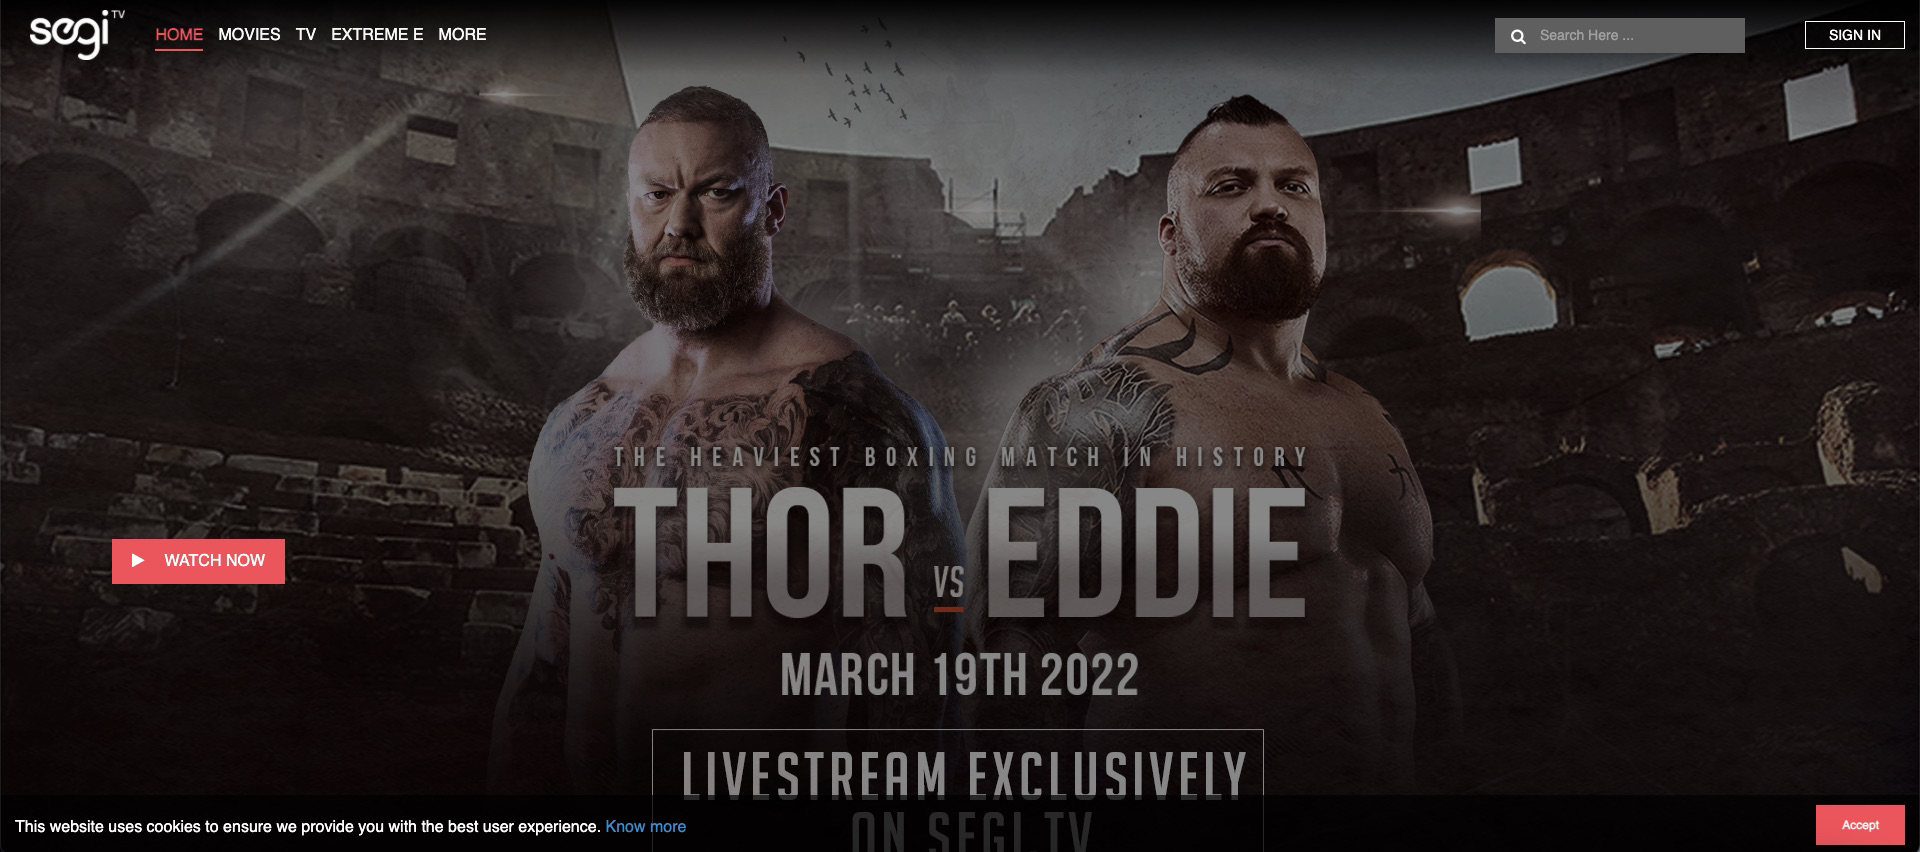 Sycamore Entertainment Group gets into live streaming boxing business with Thor vs